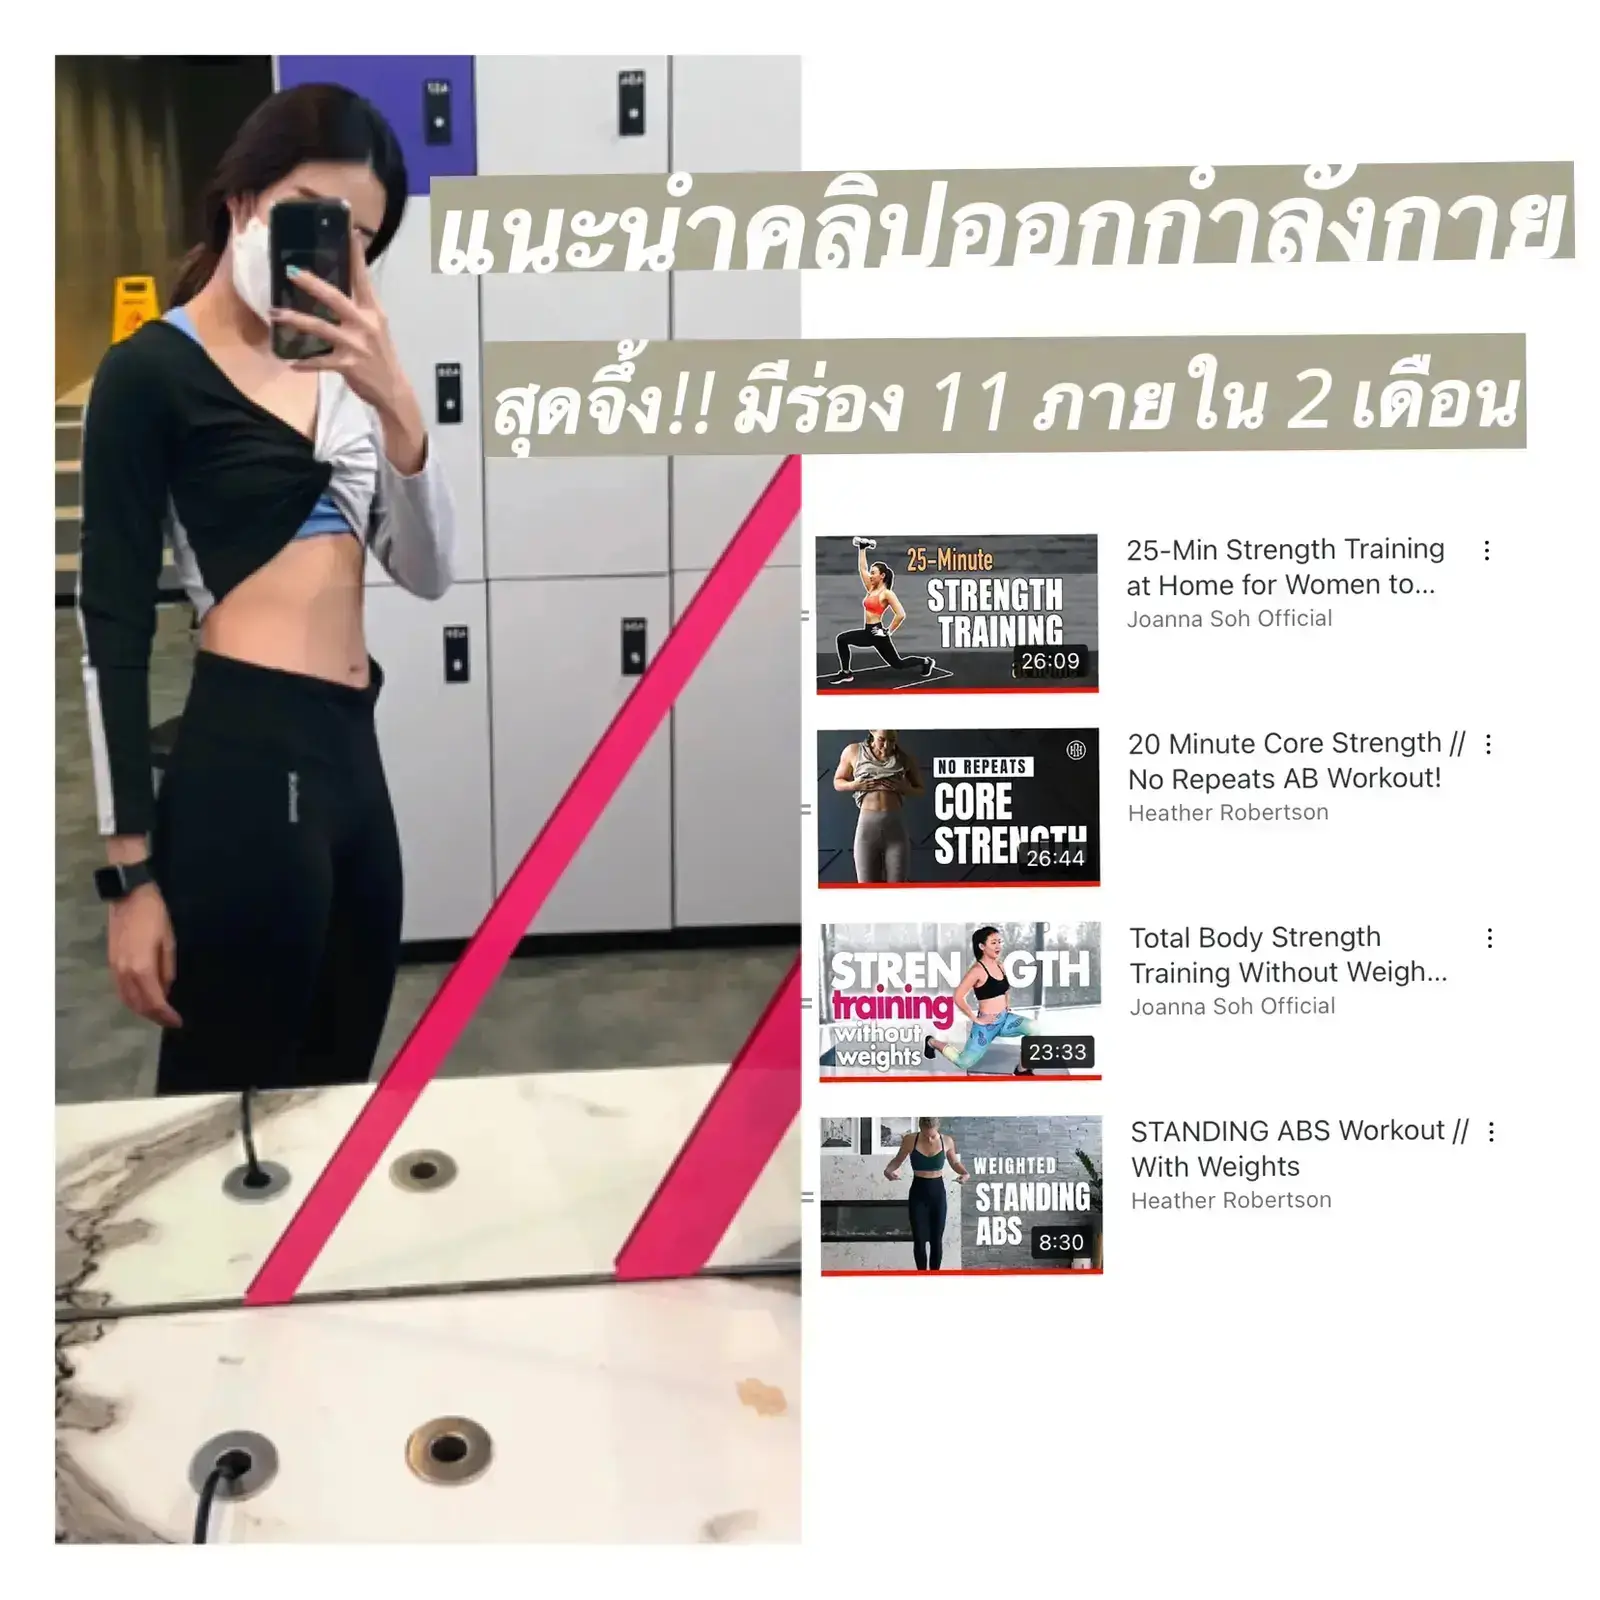 10 MIN AT HOME BOOTY WORKOUT (With Resistance Band) 